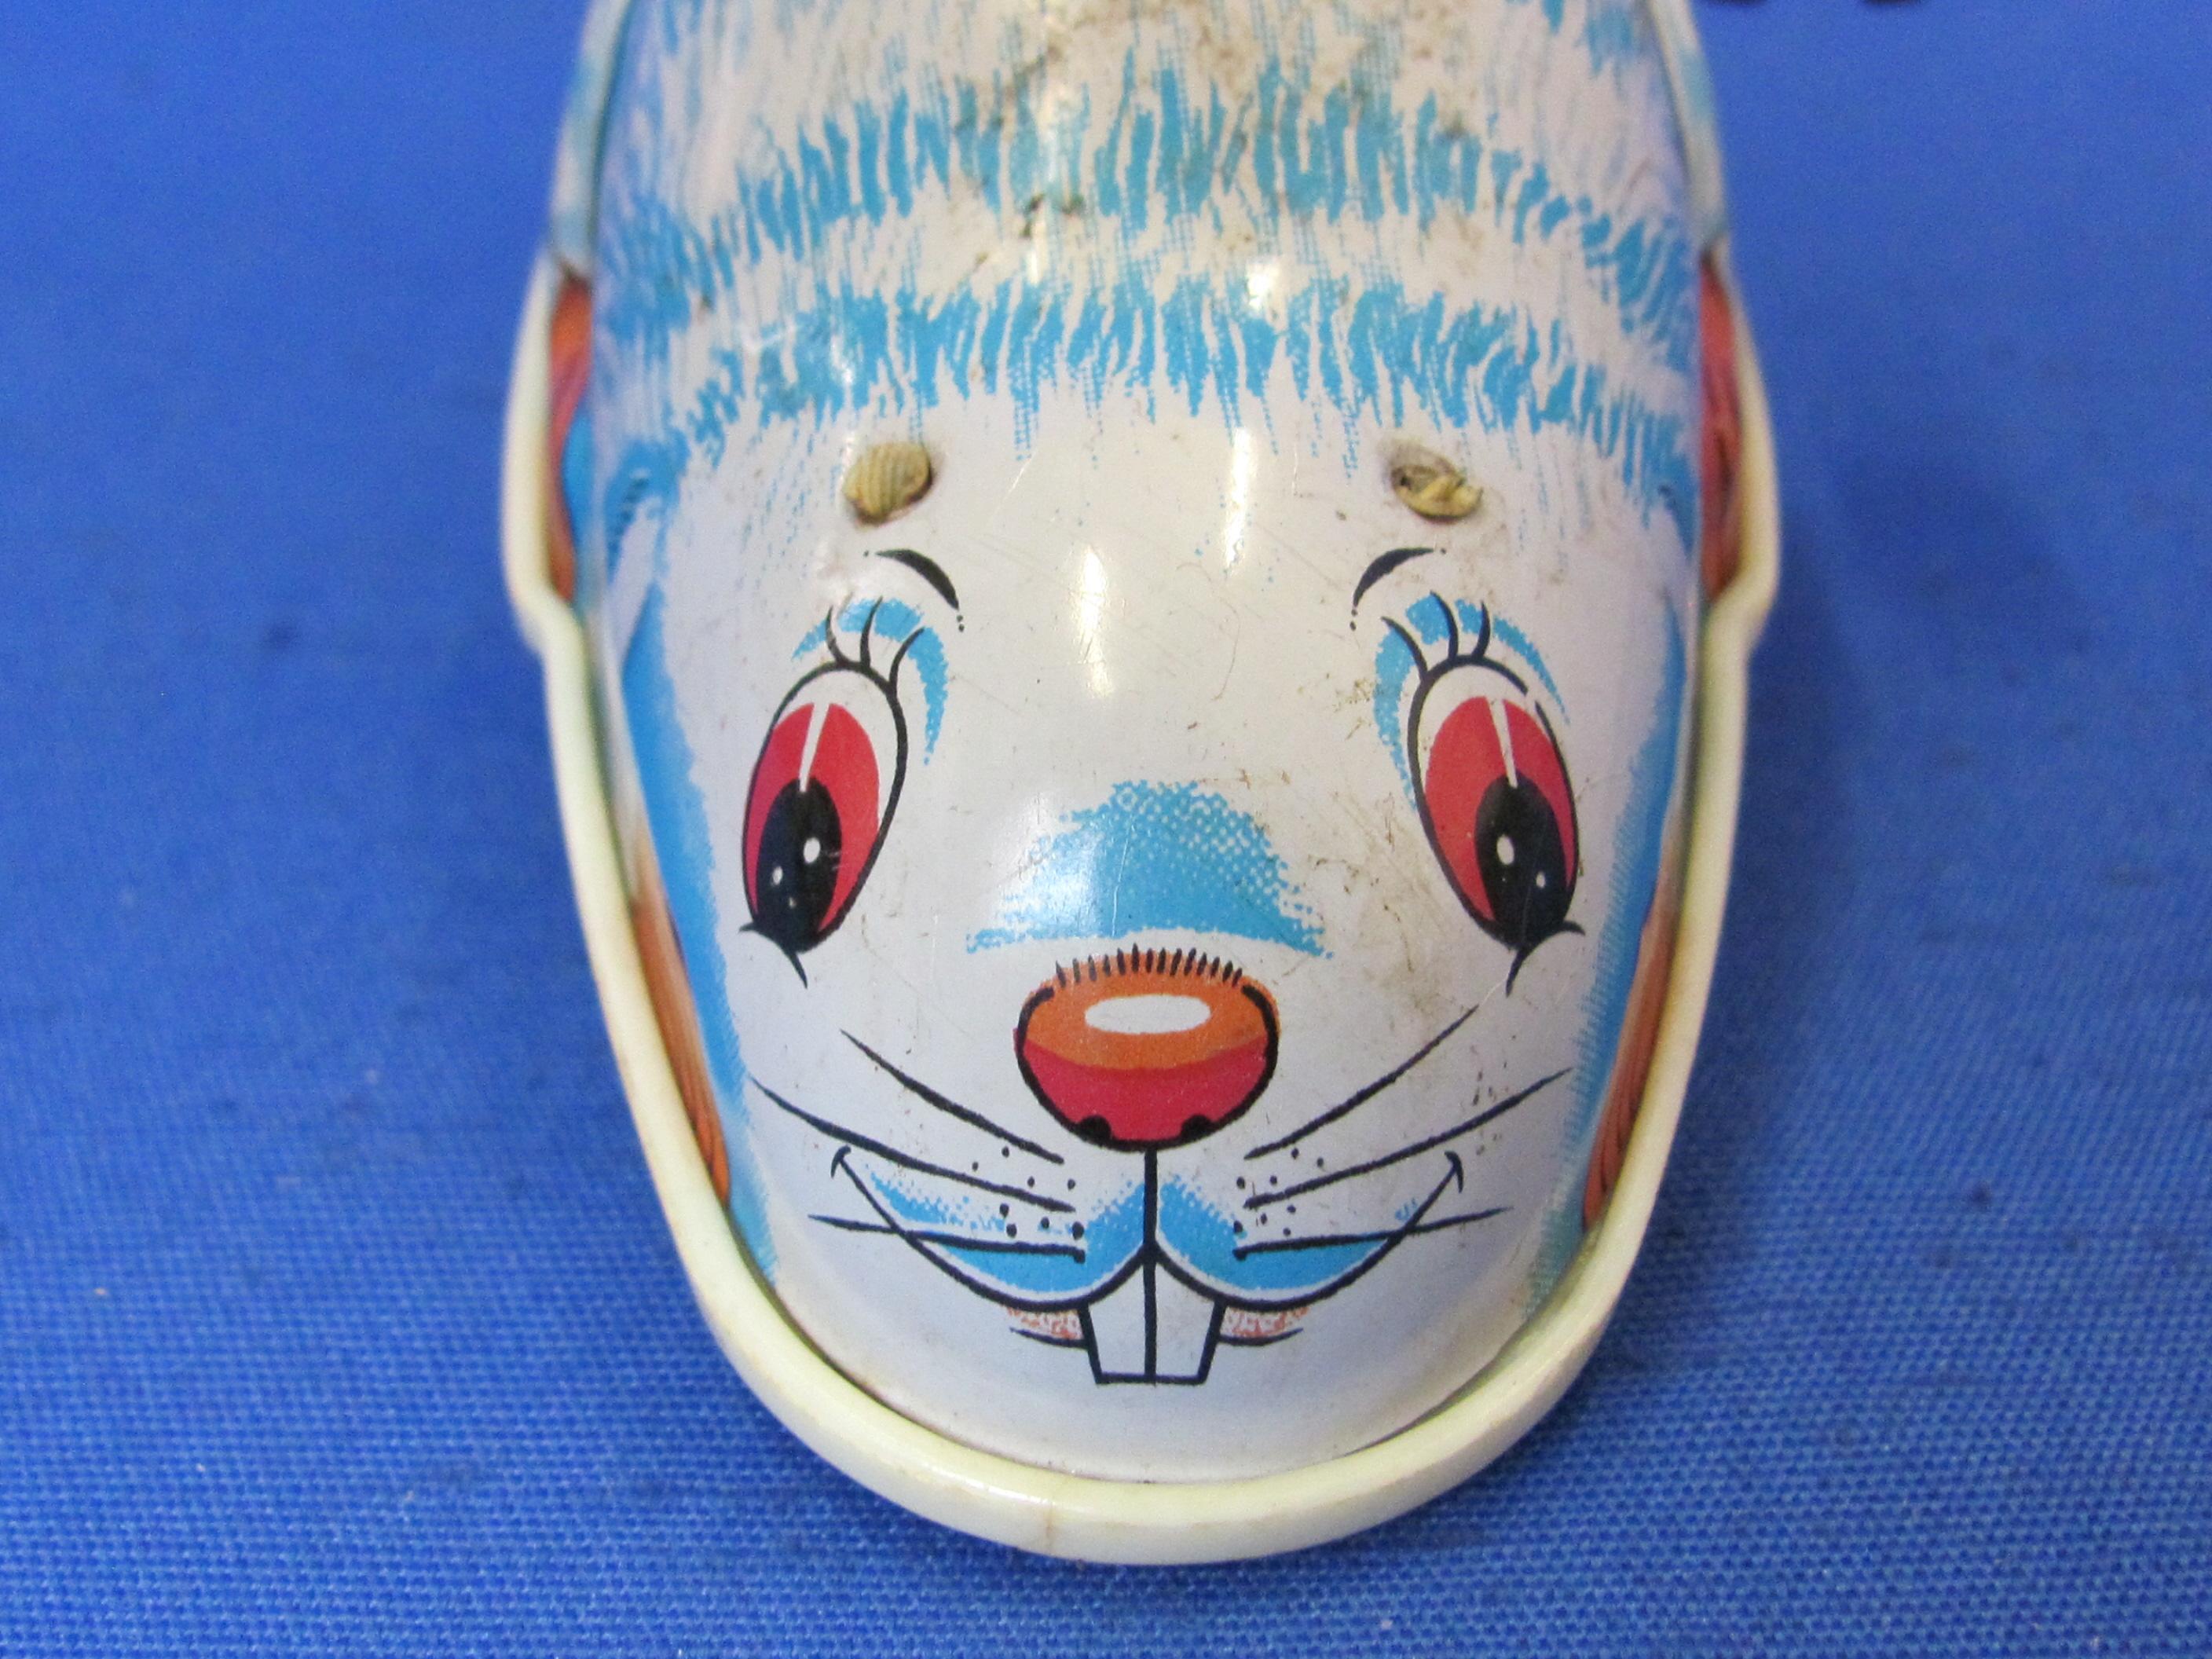 2 Tin Litho Wind-Up Toys: Bunny Rabbit & Mouse – Both made in Japan – Both Work